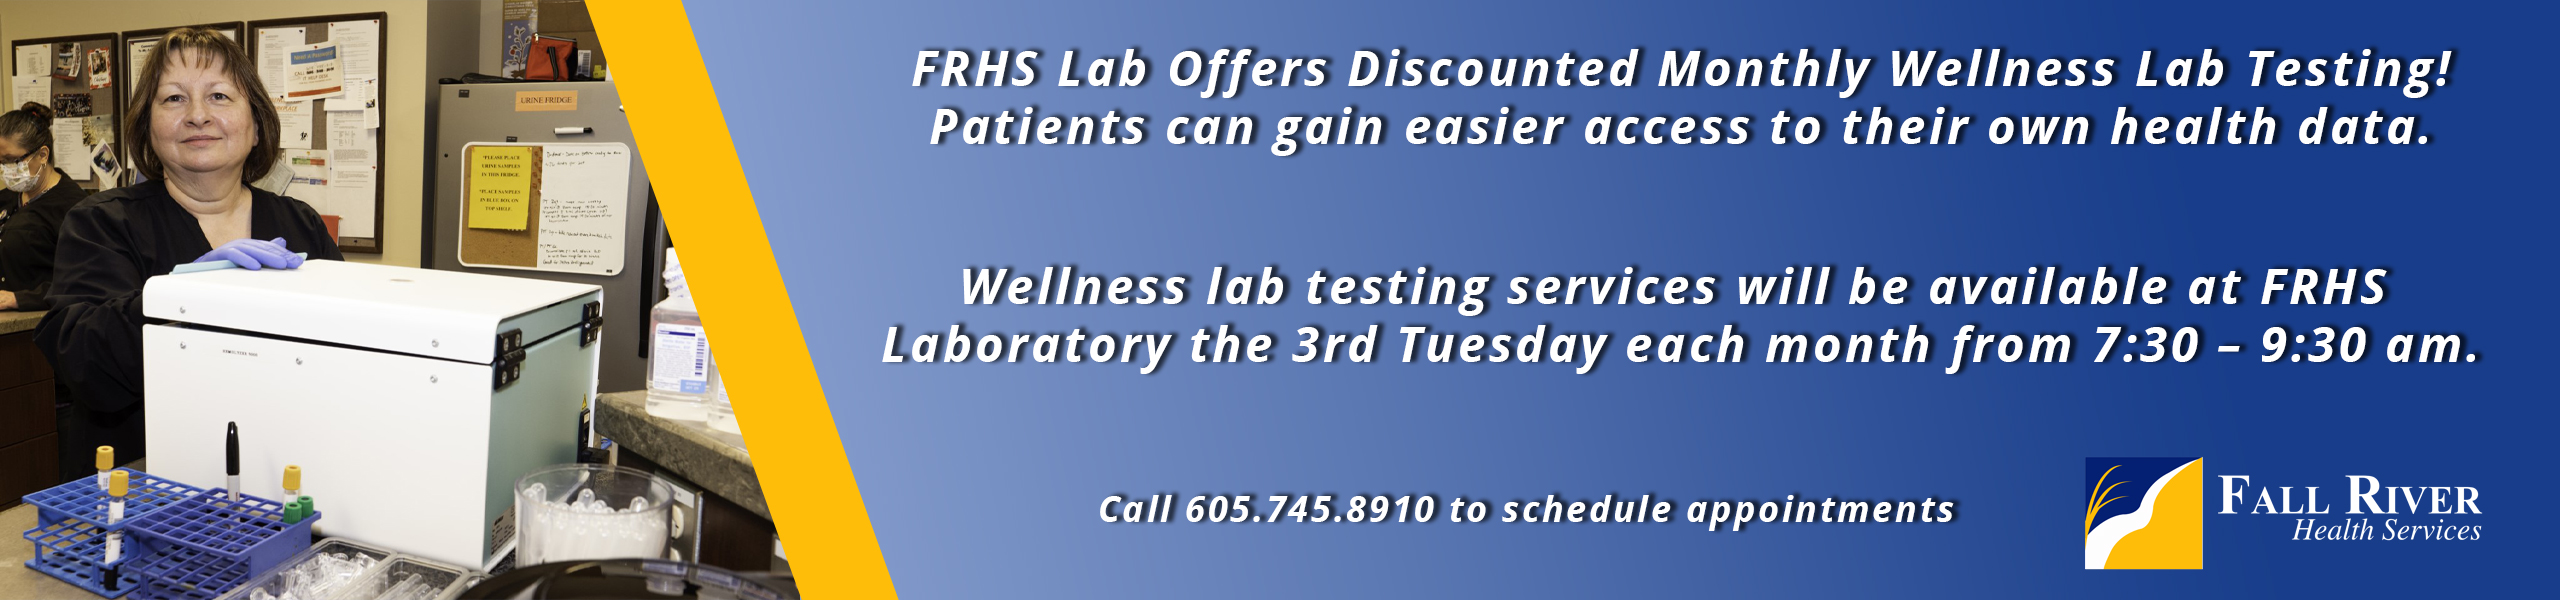 FRHS Lab Offers Discounted Monthly Wellness Lab Testing!
Patients can gain easier access to their own health data.


Wellness Lab testing services will be available at RRHS 
Laboratory the 3rd Tuesday each month from 7:30 - 9:30 am.


Call 605.745.8910 to schedule  appointments

Fall River Health Services